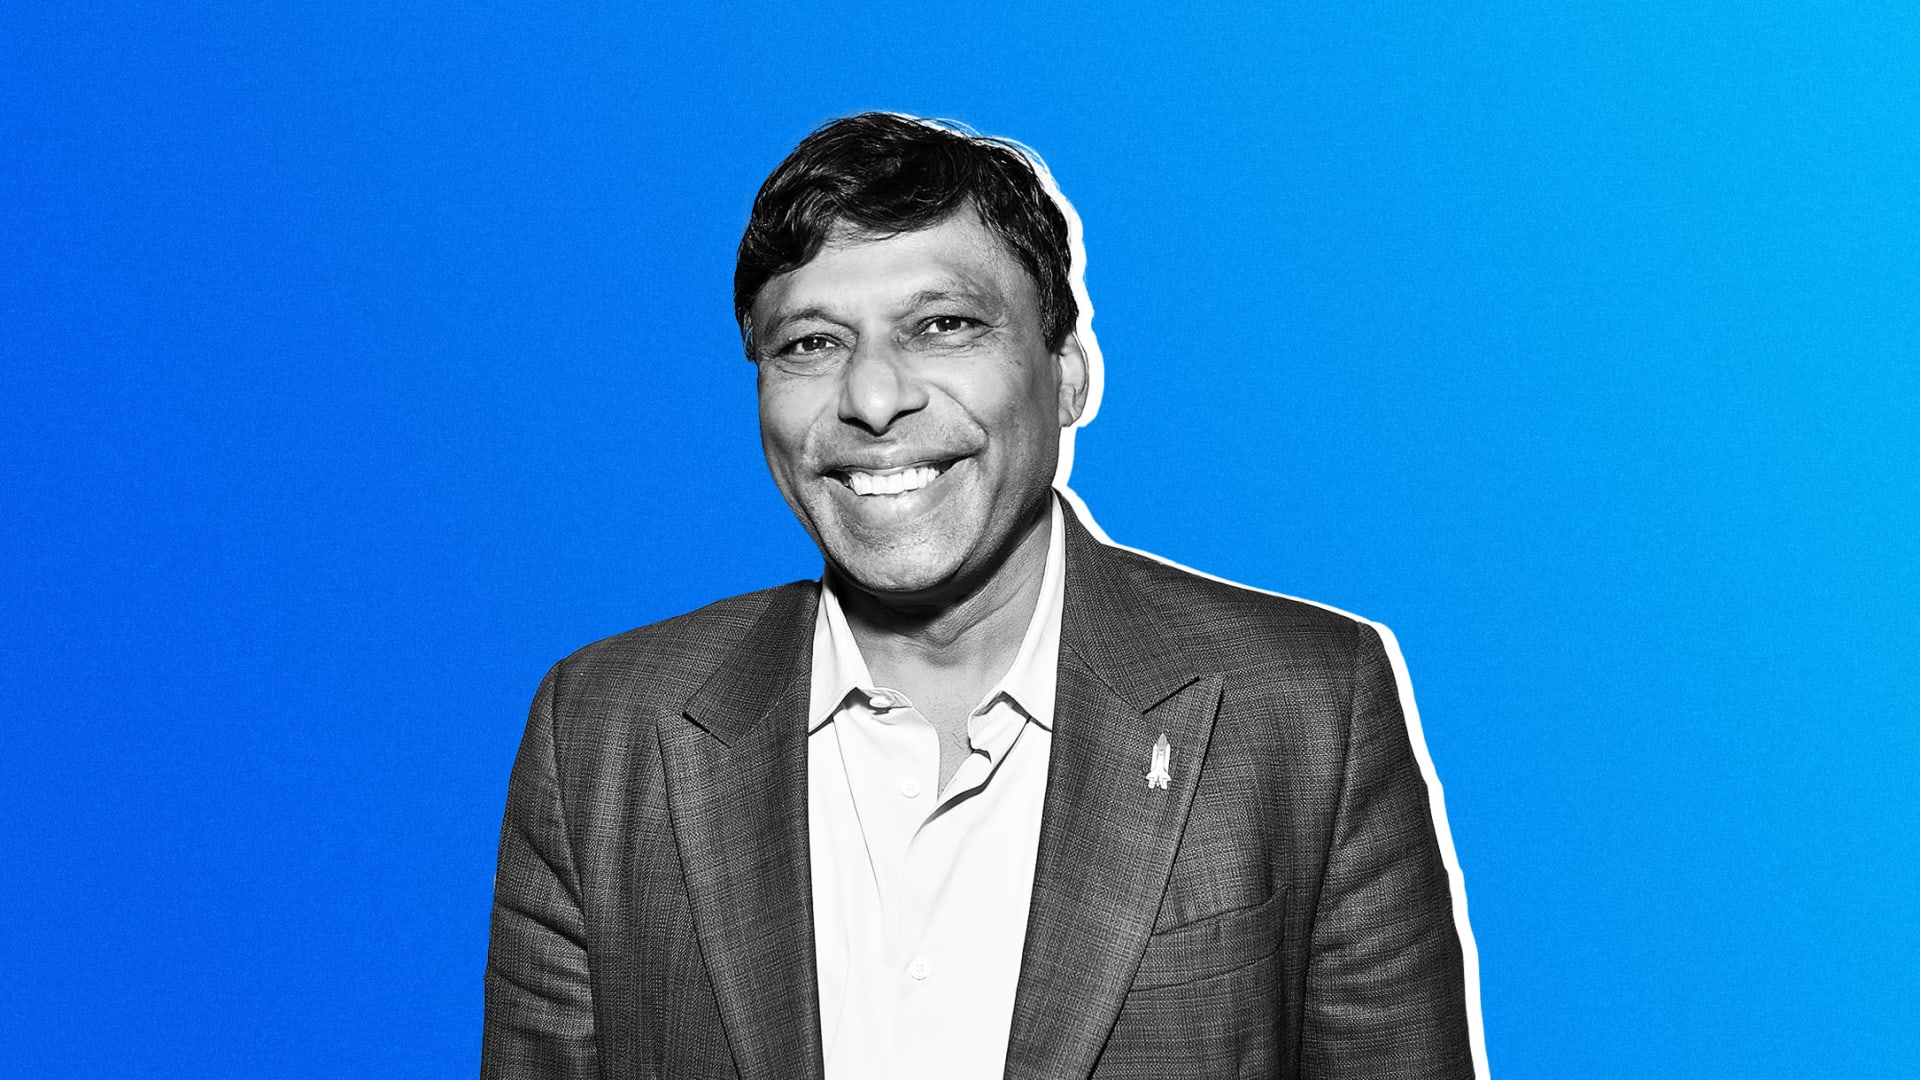 For Naveen Jain, the Big Problems Are the Draw